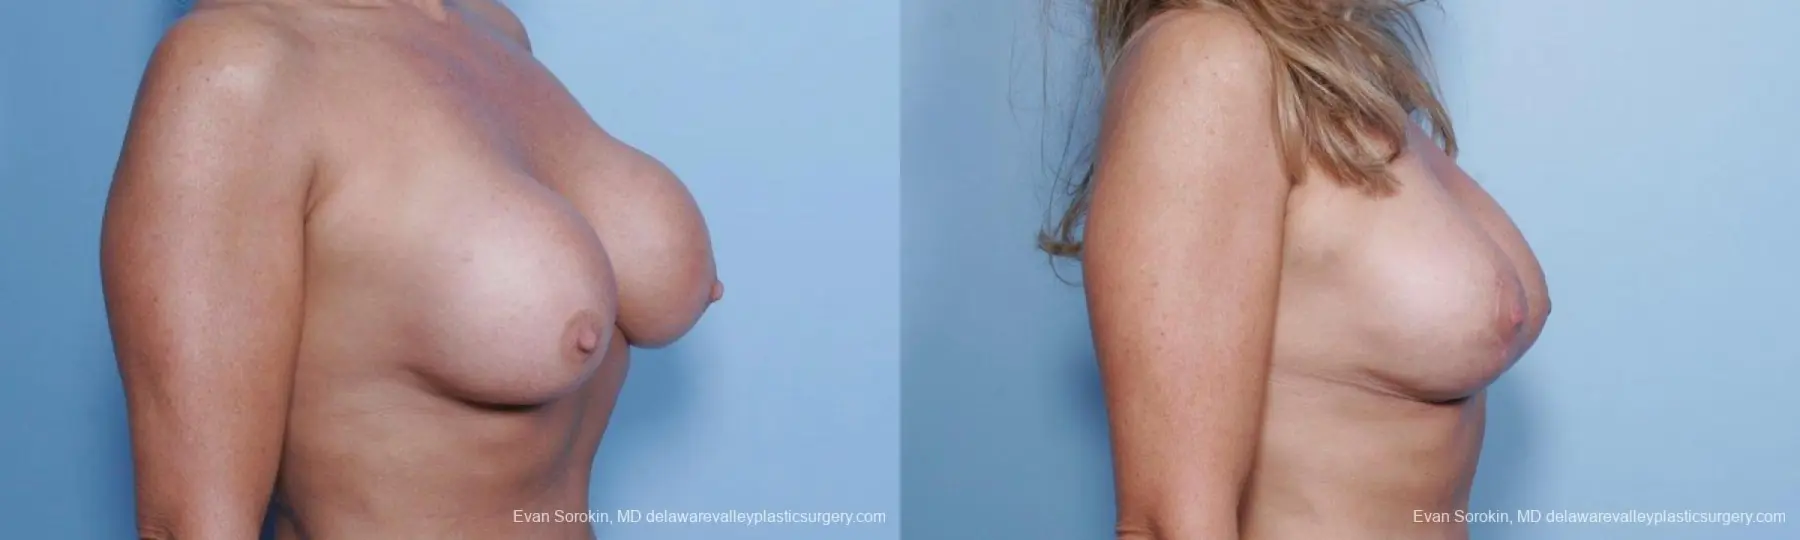 Philadelphia Breast Lift and Augmentation 9453 - Before and After 2